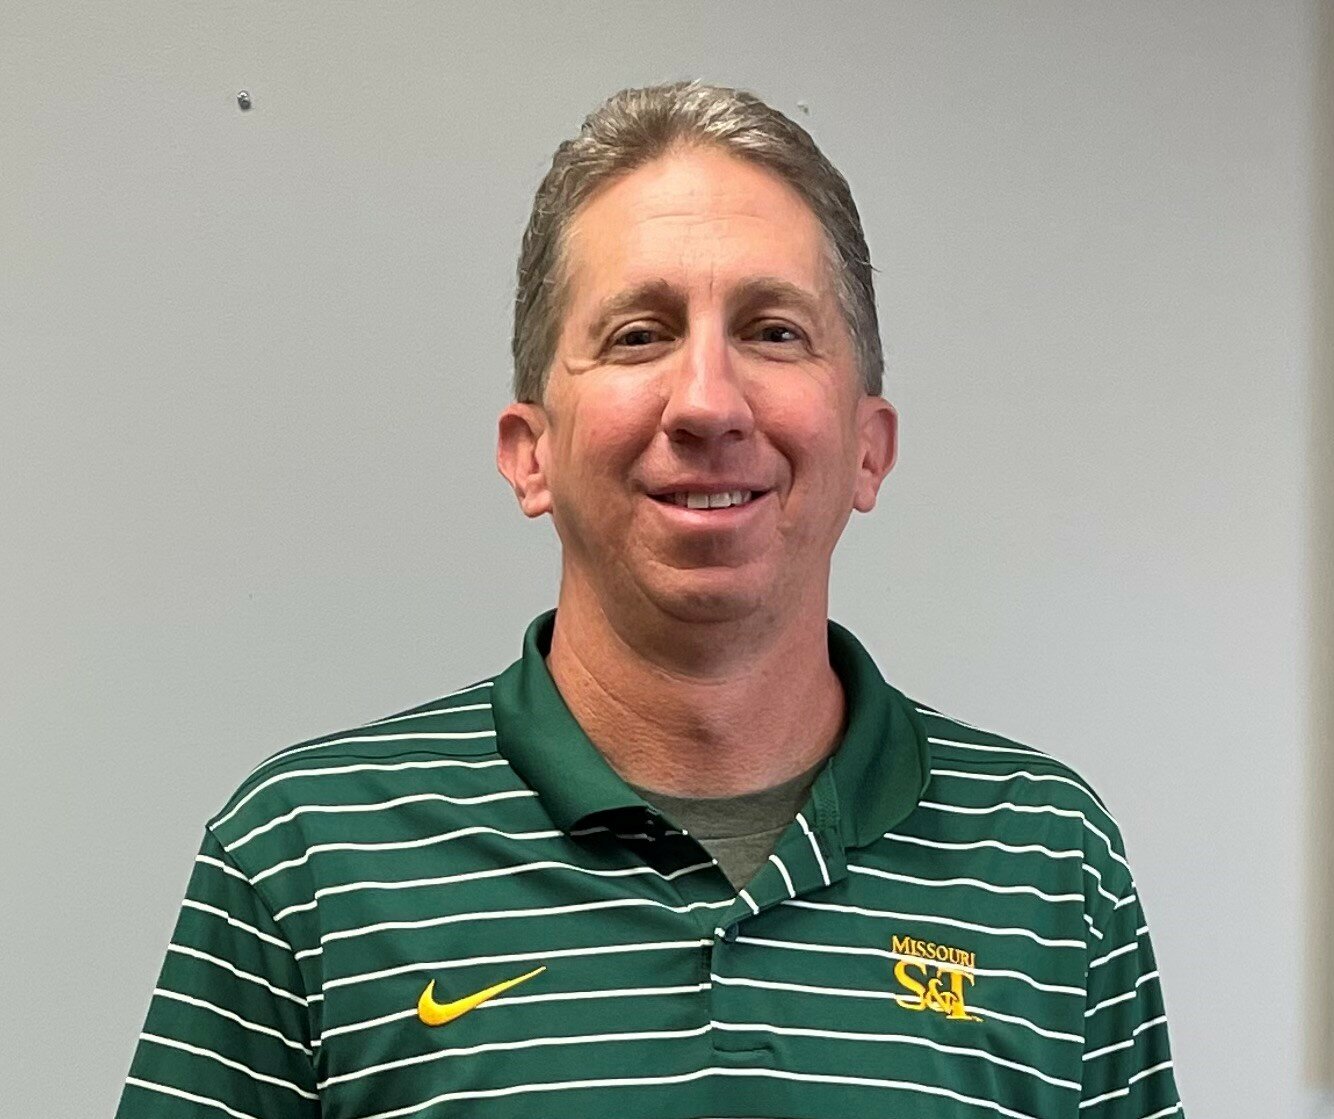 Wright City’s Doug Smith was recently hired as the school’s girls basketball coach. Smith also serves as the one of the district’s assistant superintendents. The hire still needs board approval next week.